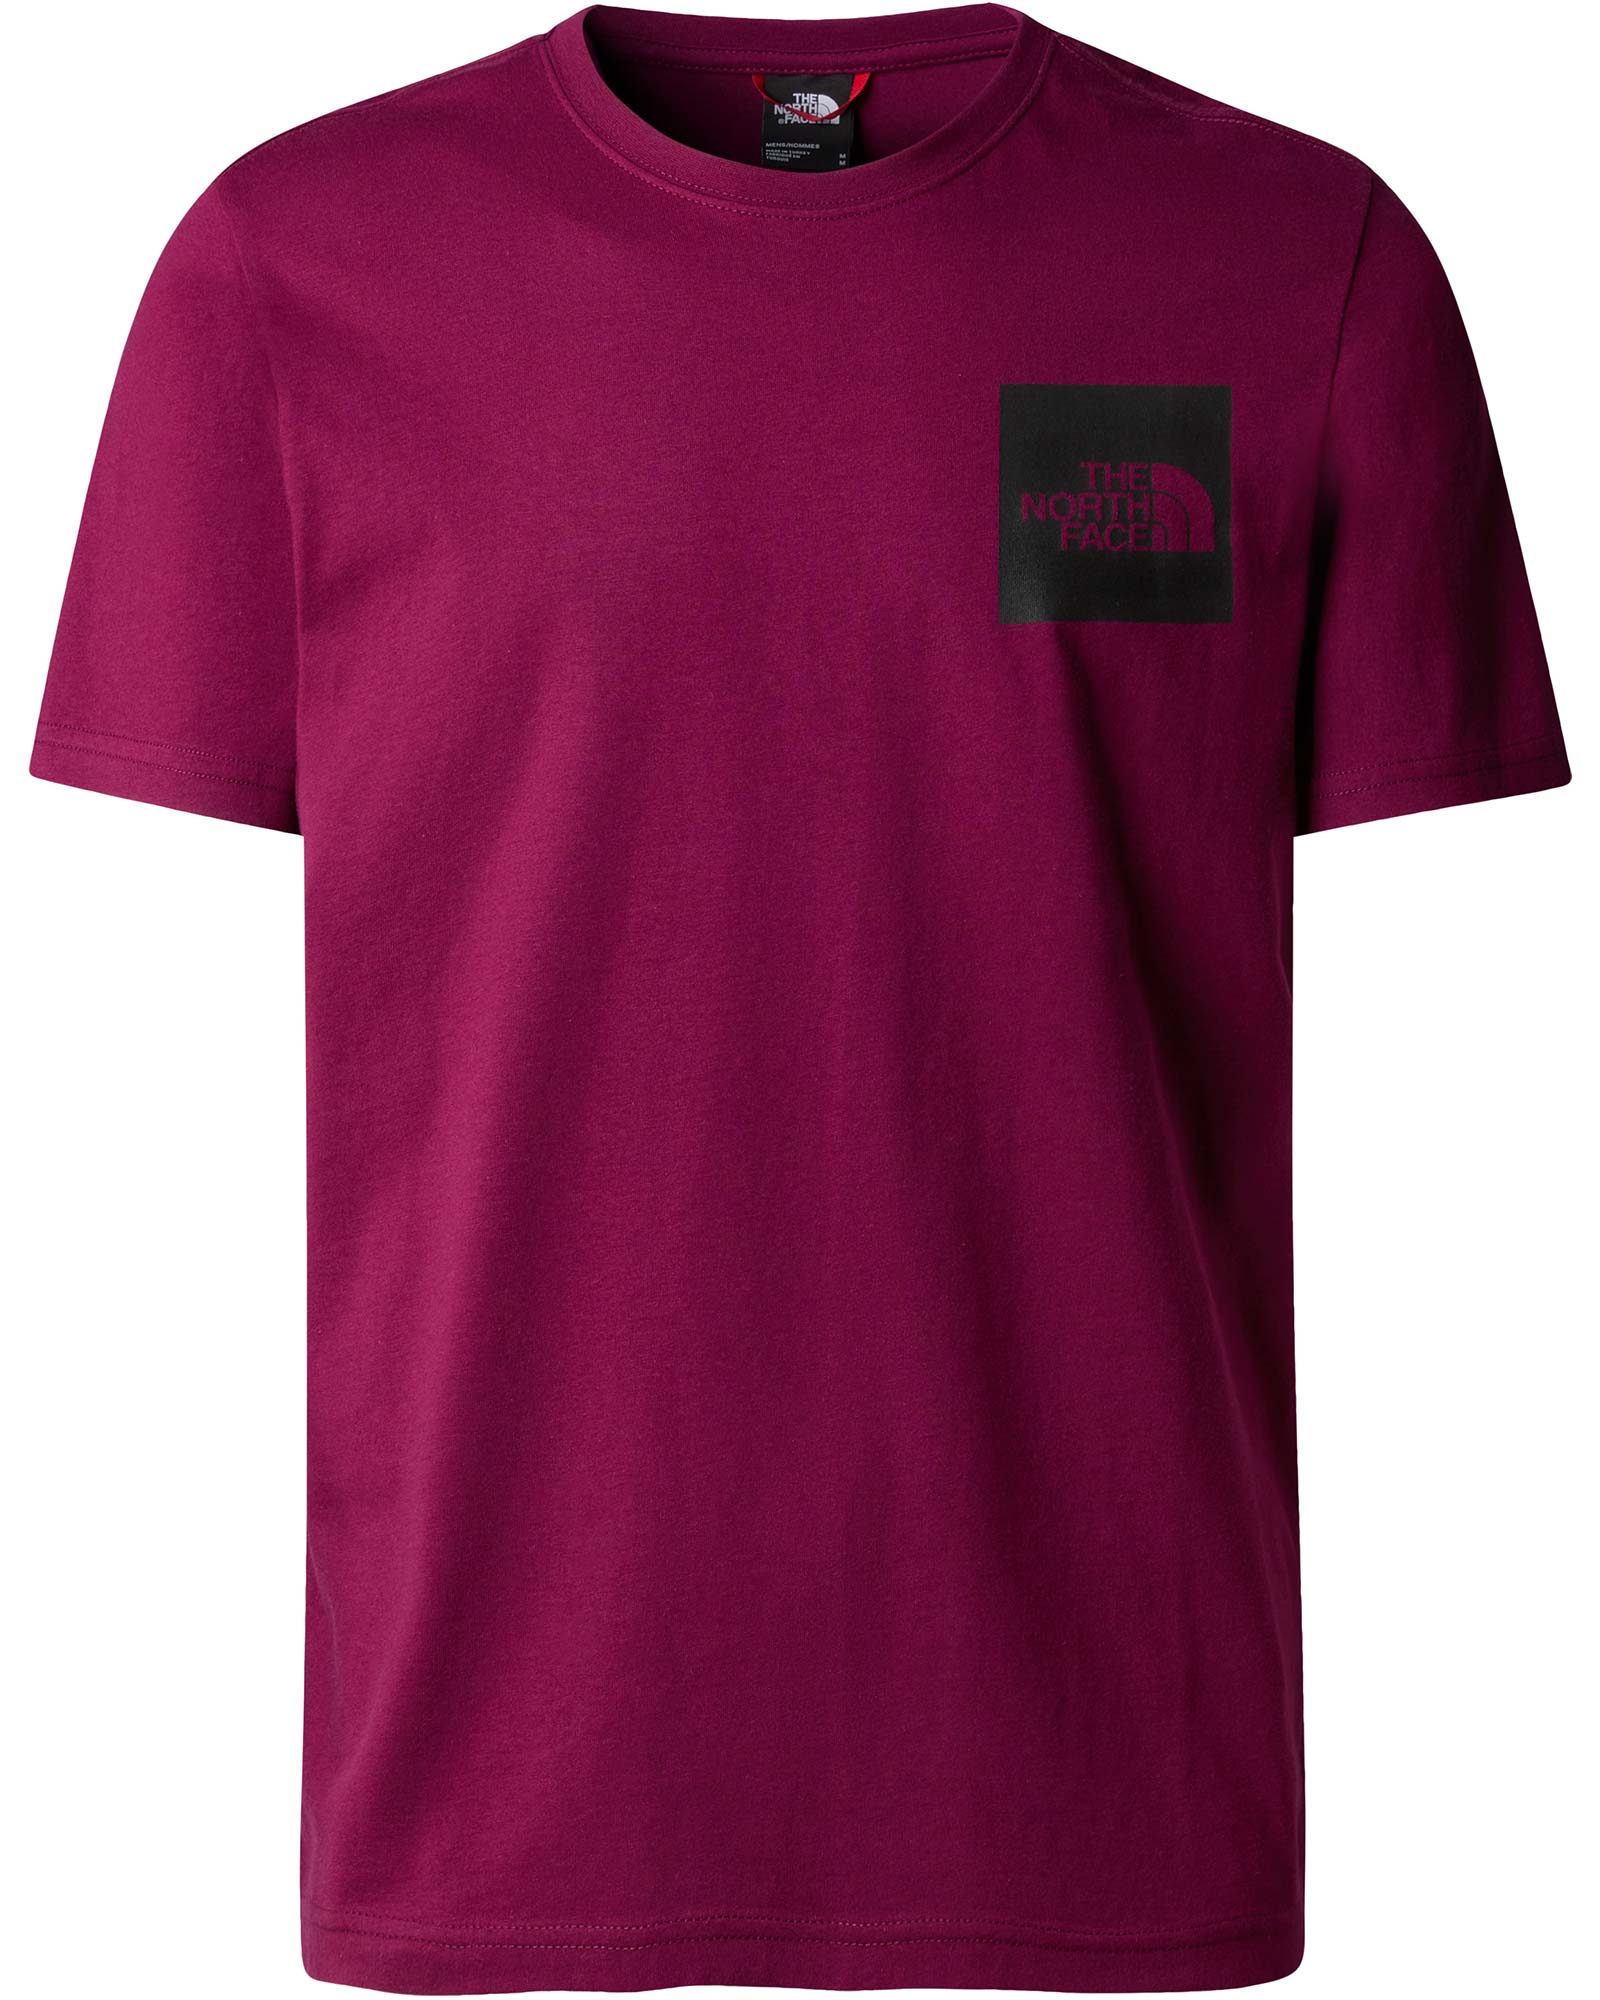 The North Face Fine Men’s Tee - Boysenberry L